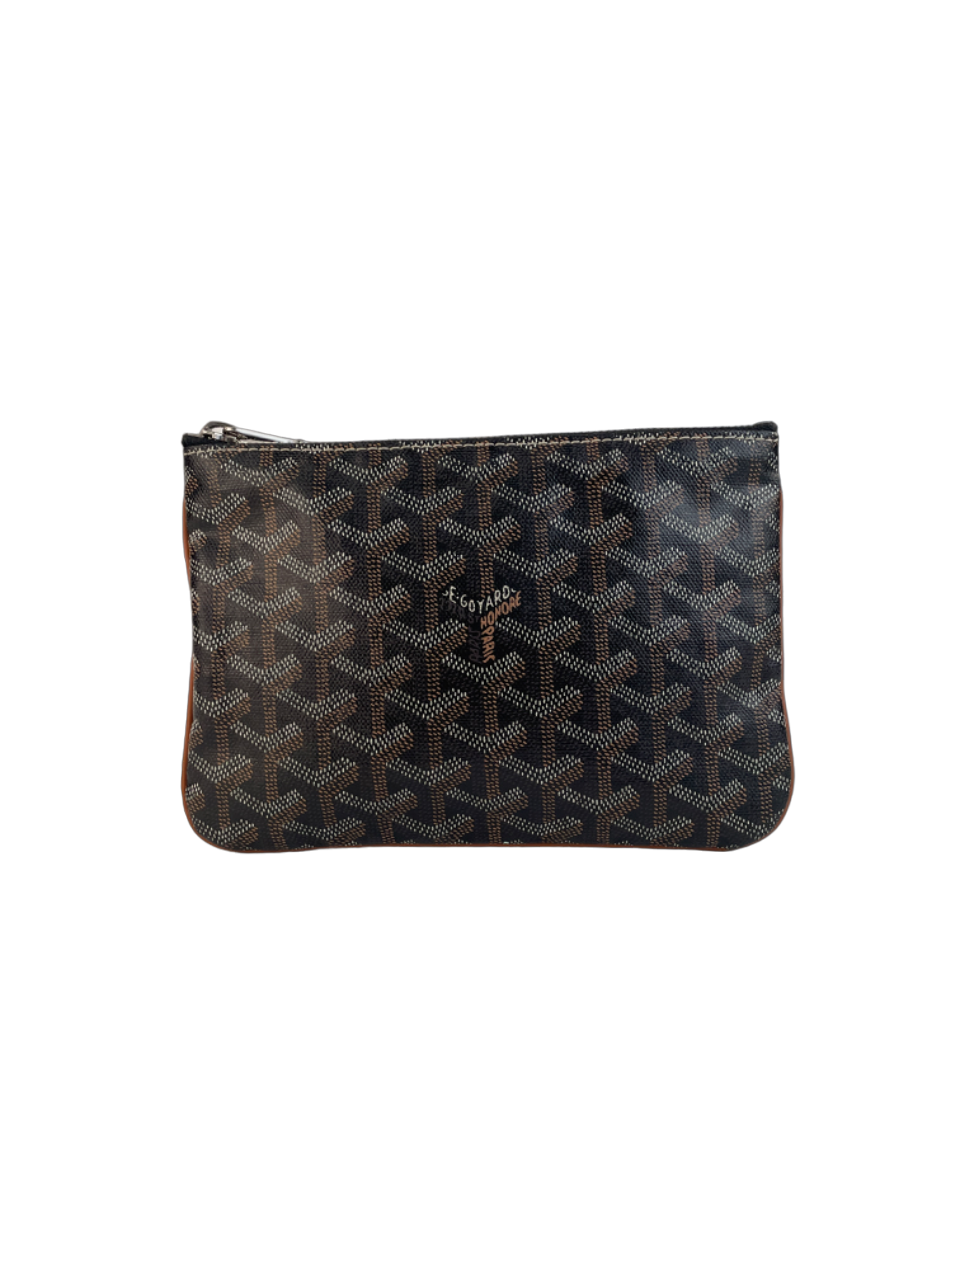 wood trimmed Goyard clutch; dreaming of this with my monogram etched on  itsigh